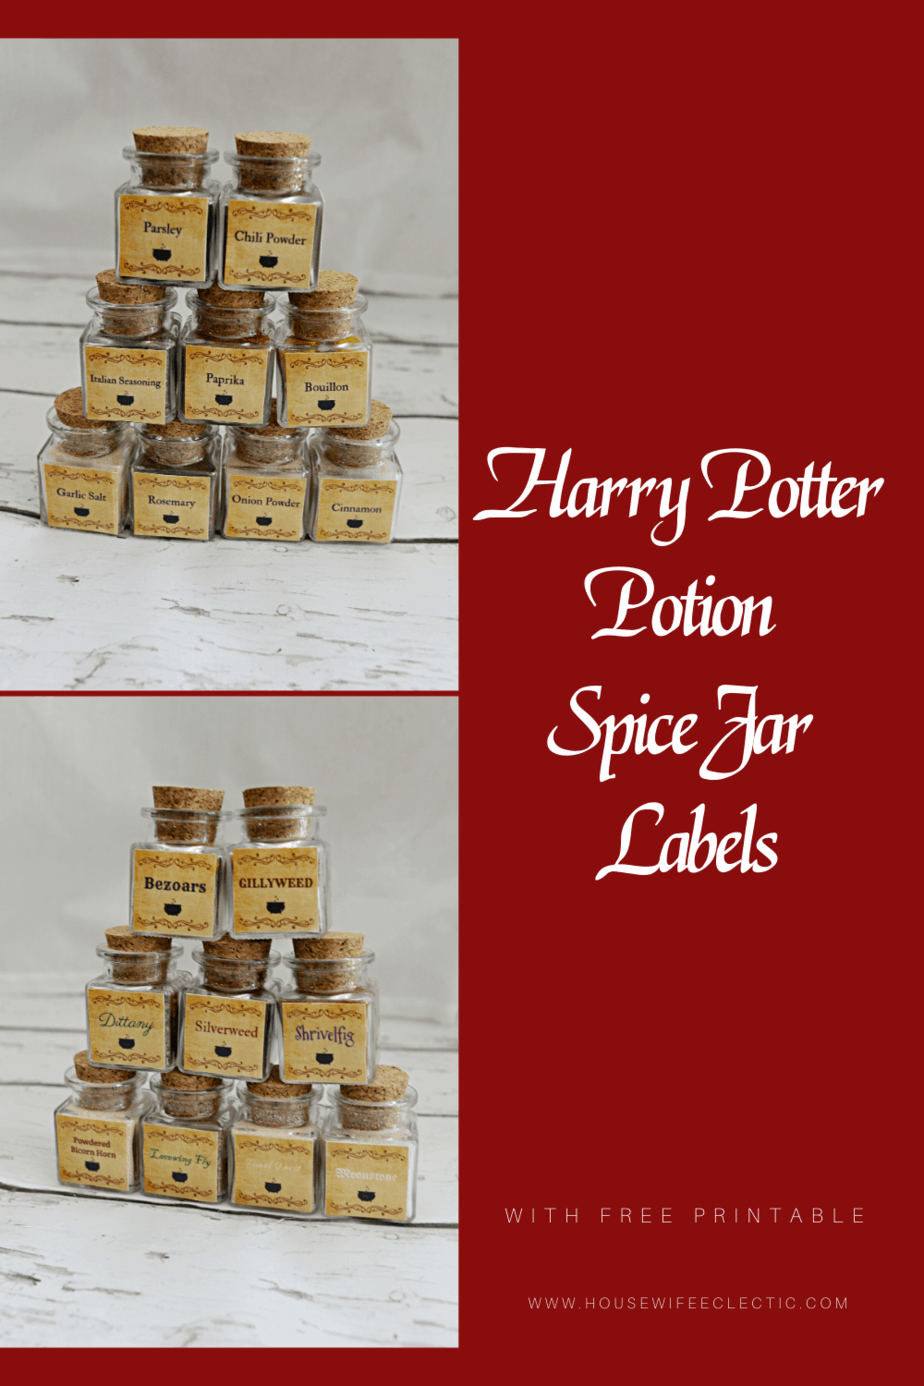 Housewife Eclectic: Harry Potter Potion Spice Jar Labels